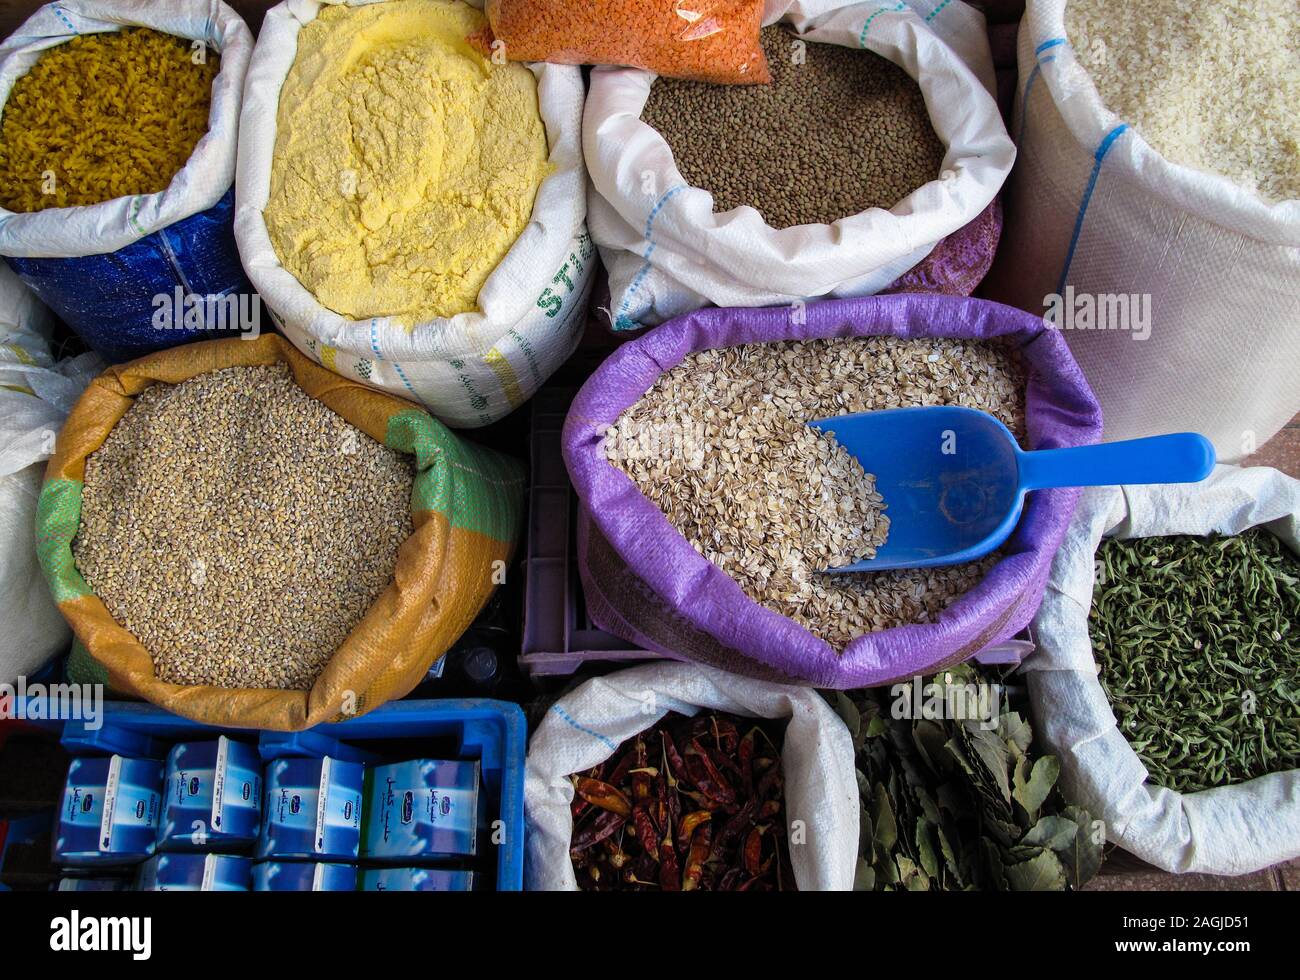 Colorful bags of grain and meal in an outdoor market in Casablanca, Morocco. Stock Photo